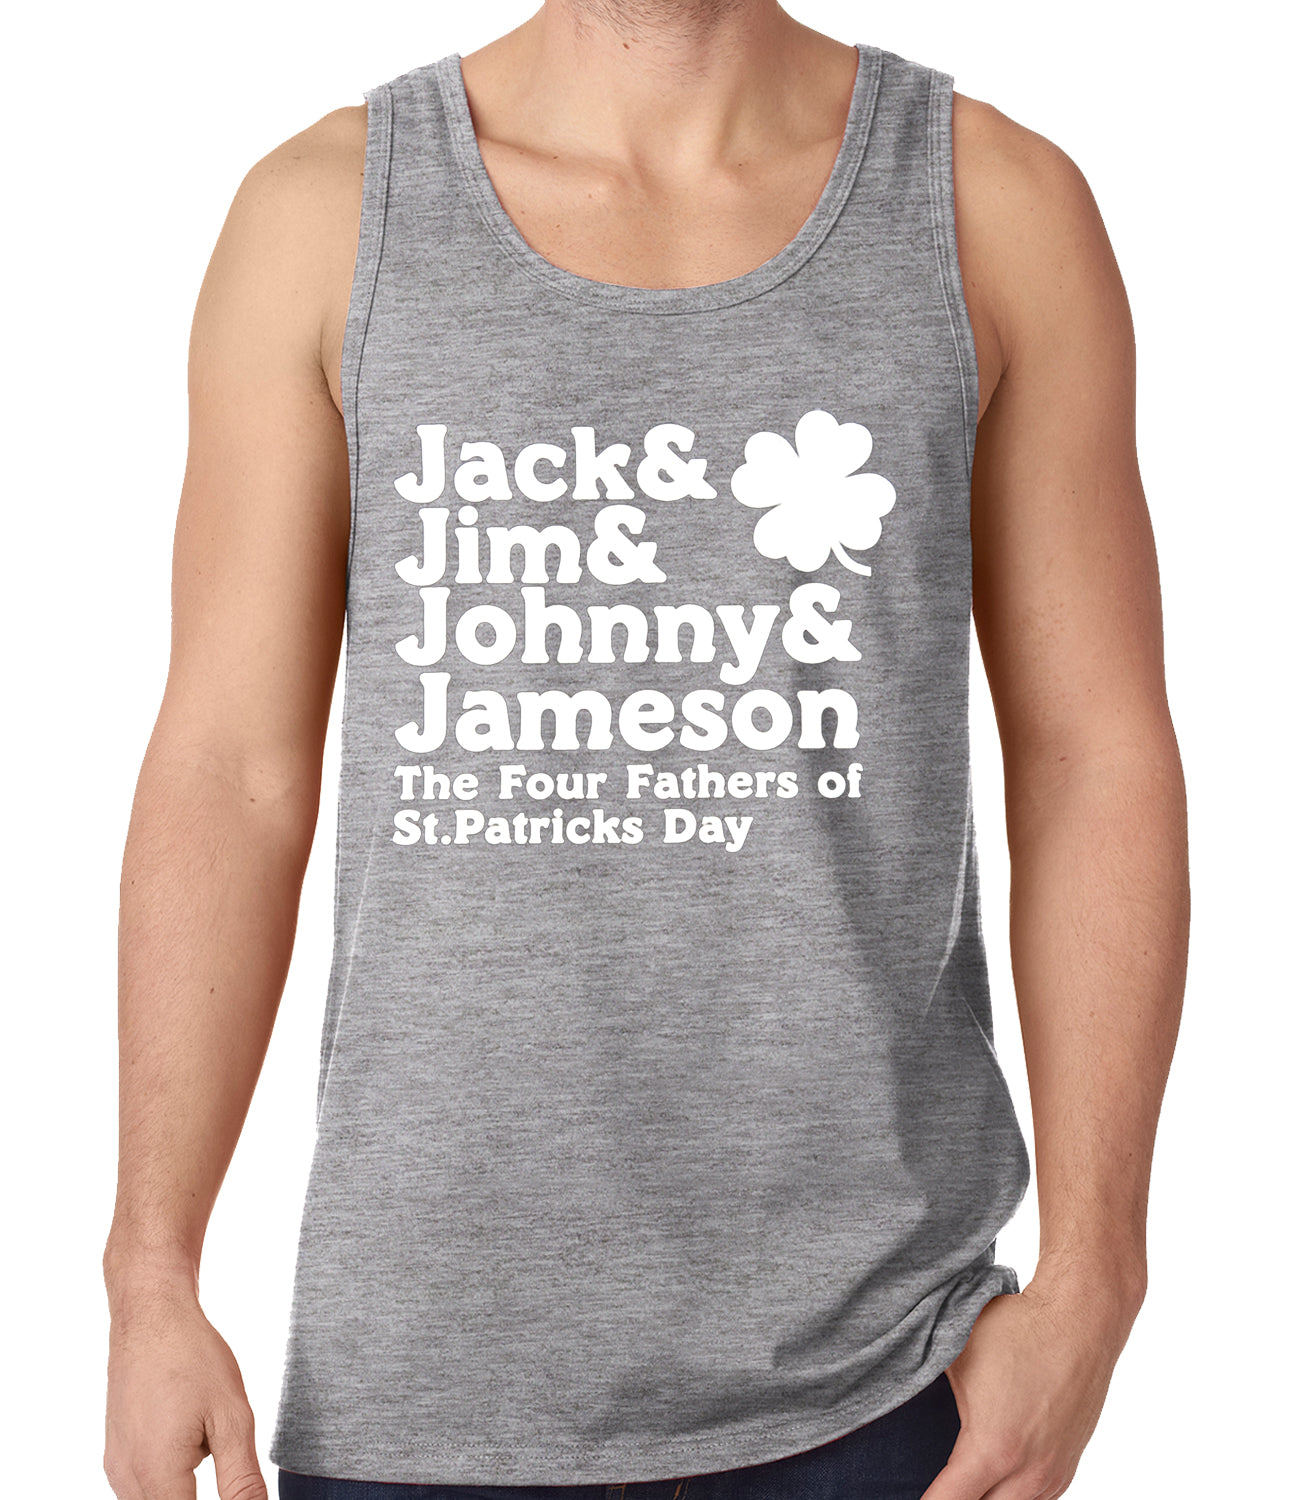 The Four Fathers of St. Patrick's Day Tanktop